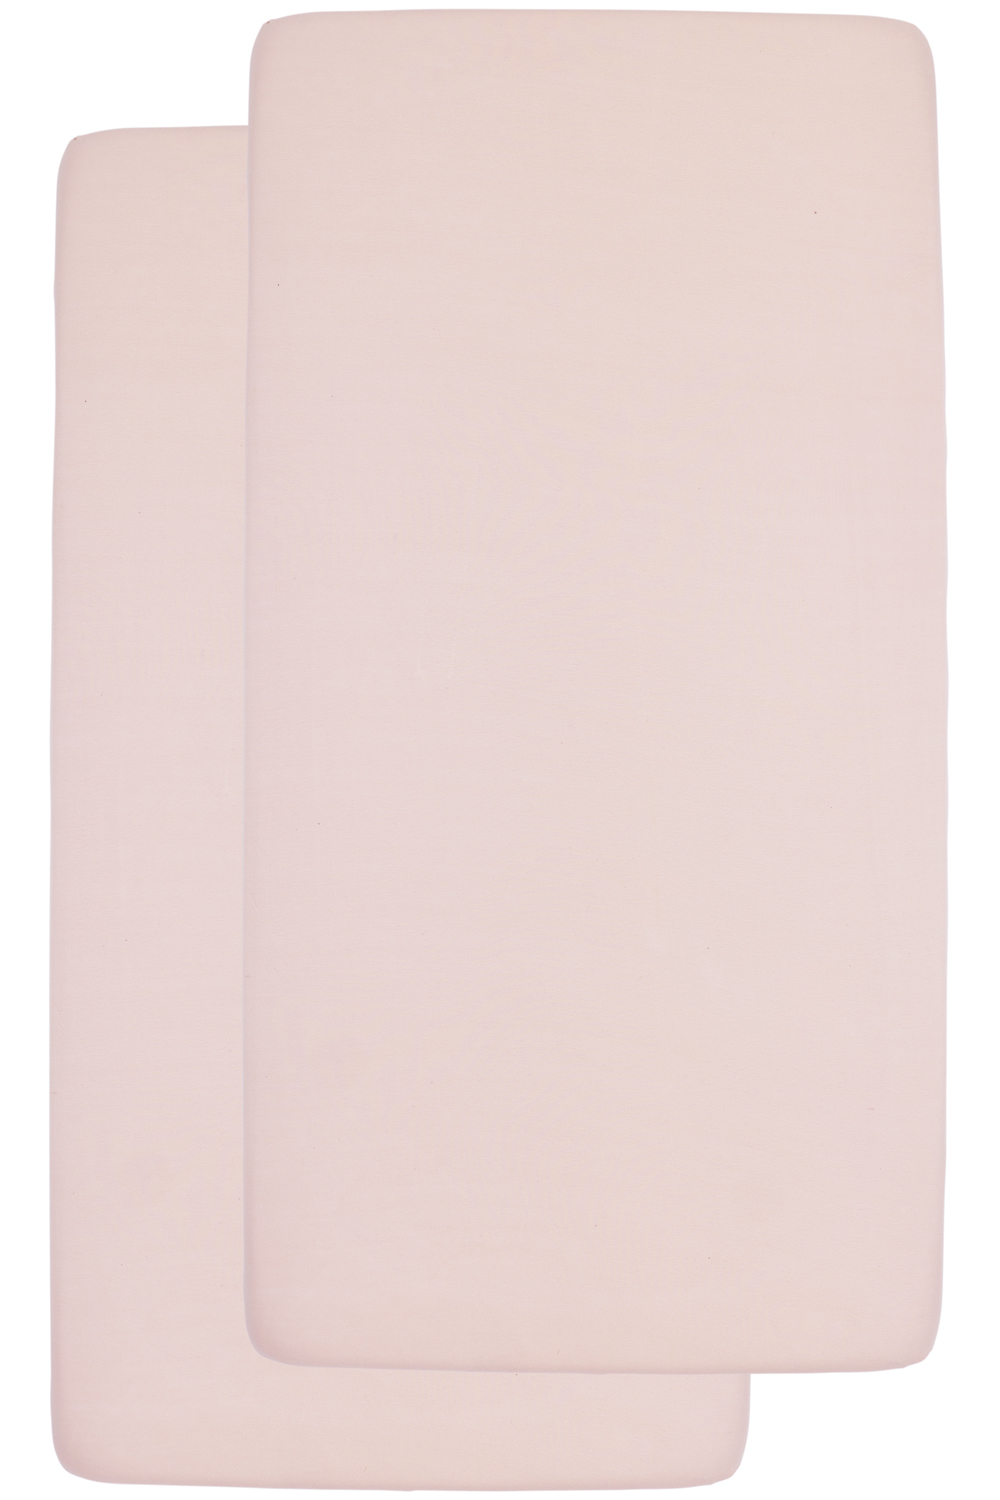 Fitted sheet juniorbed 2-pack Uni - soft pink - 70x140/150cm